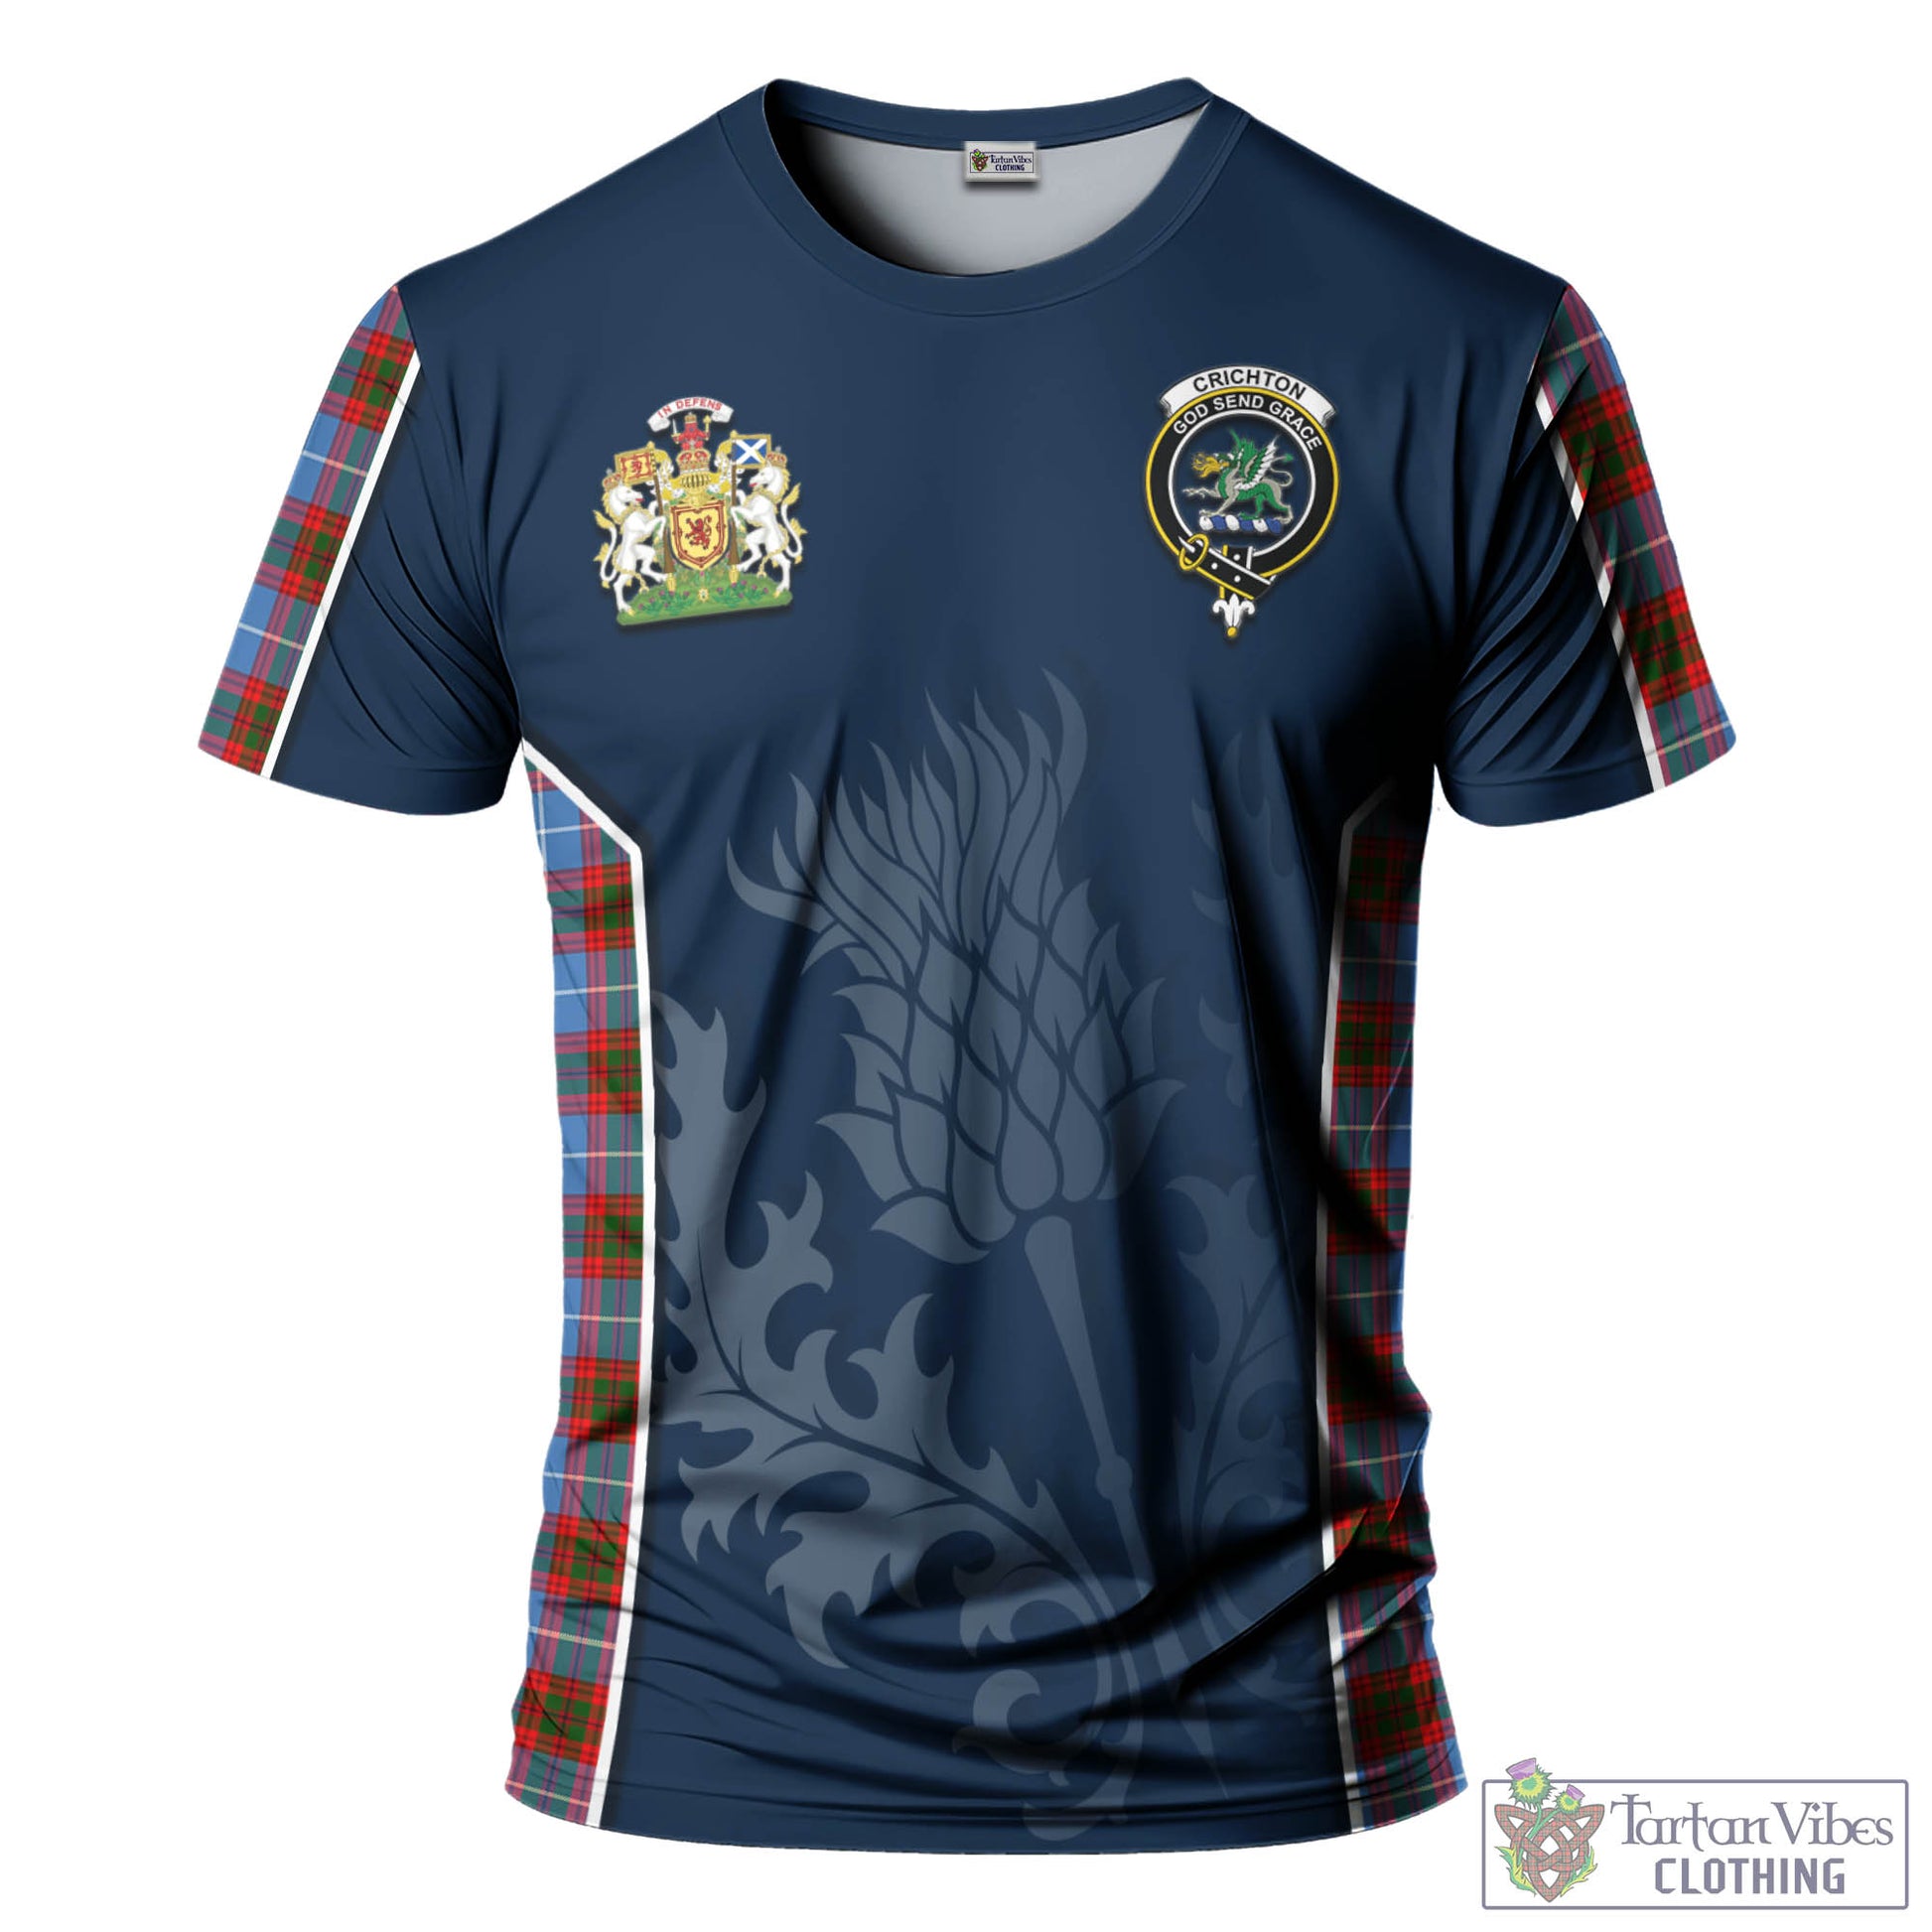 Tartan Vibes Clothing Crichton Tartan T-Shirt with Family Crest and Scottish Thistle Vibes Sport Style